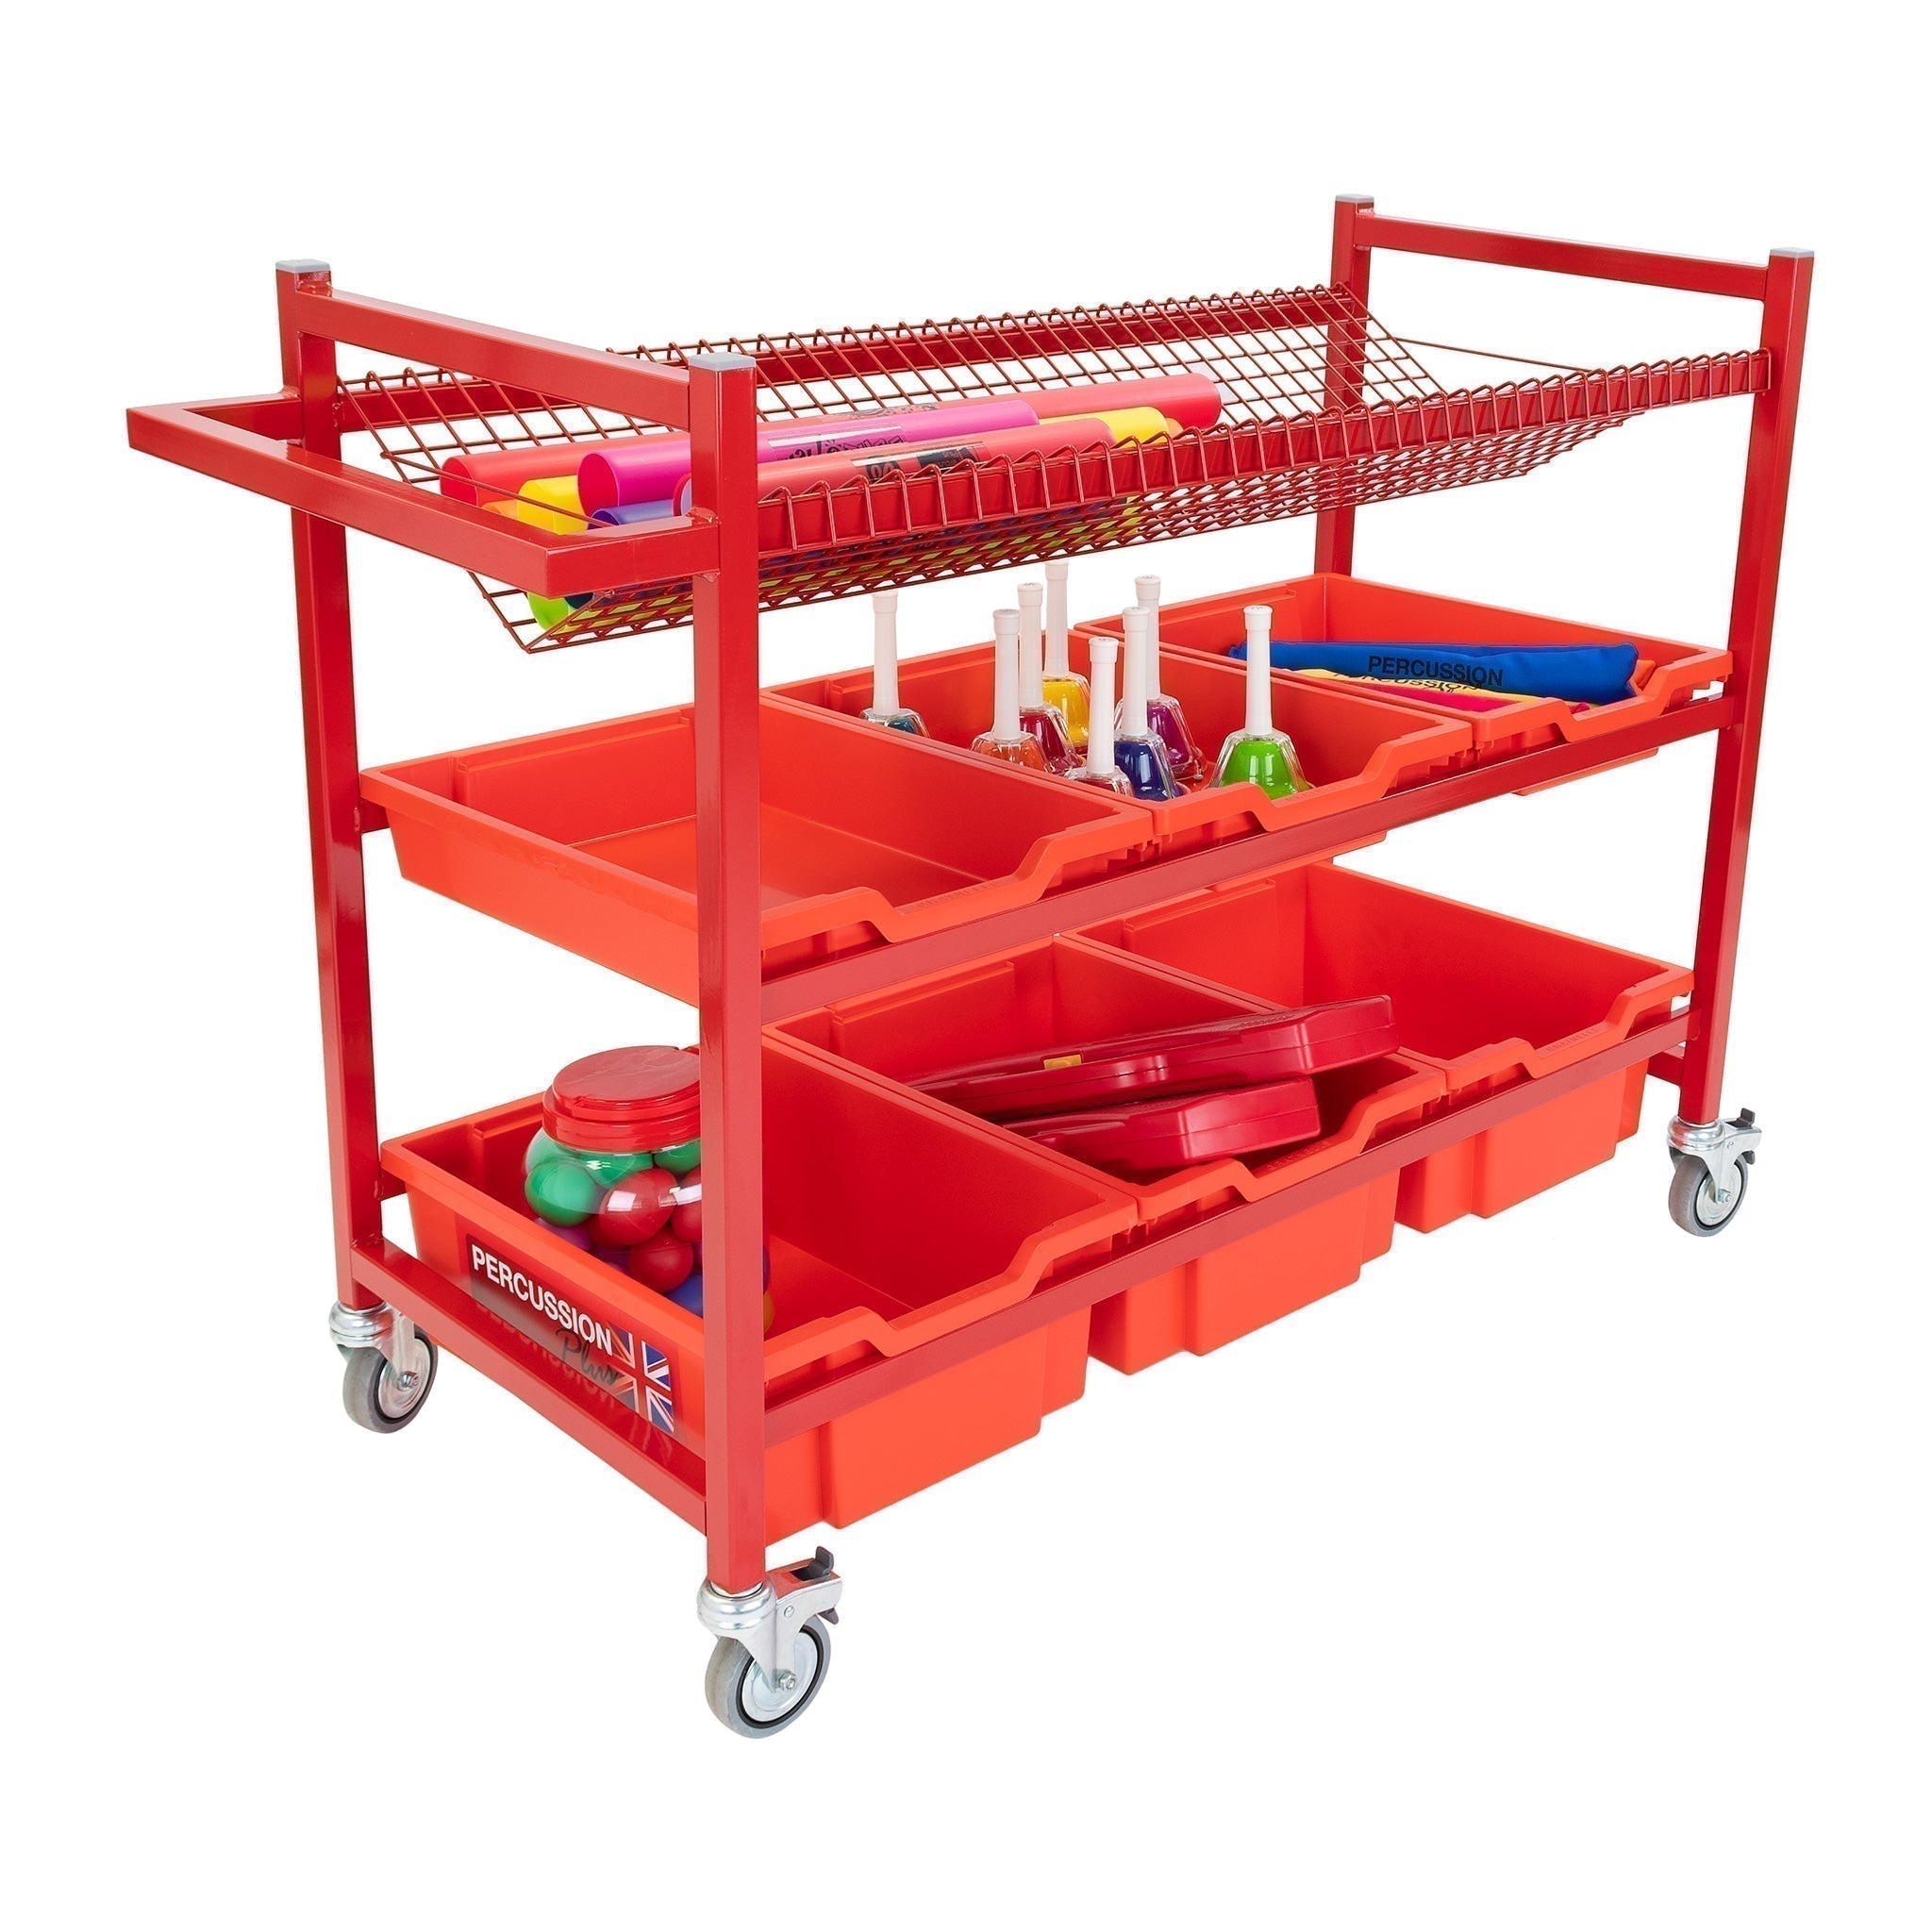 Percussion Plus mobile instrument trolley, Our recently redesigned and upgraded PP1057 storage trolley has 3 levels. Up top there is a V shaped plastic coated wire shelf, the middle contains 3 x Gratnells shallow plastic trays and at the bottom there are 3 x Gratnells deep plastic trays.Metal framed storage is strong and durable making it ideal for use in school classroom and also nursery environments.Percussion Plus storage trolleys are supplied with either mesh or plastic trays or a mix of both and are fu